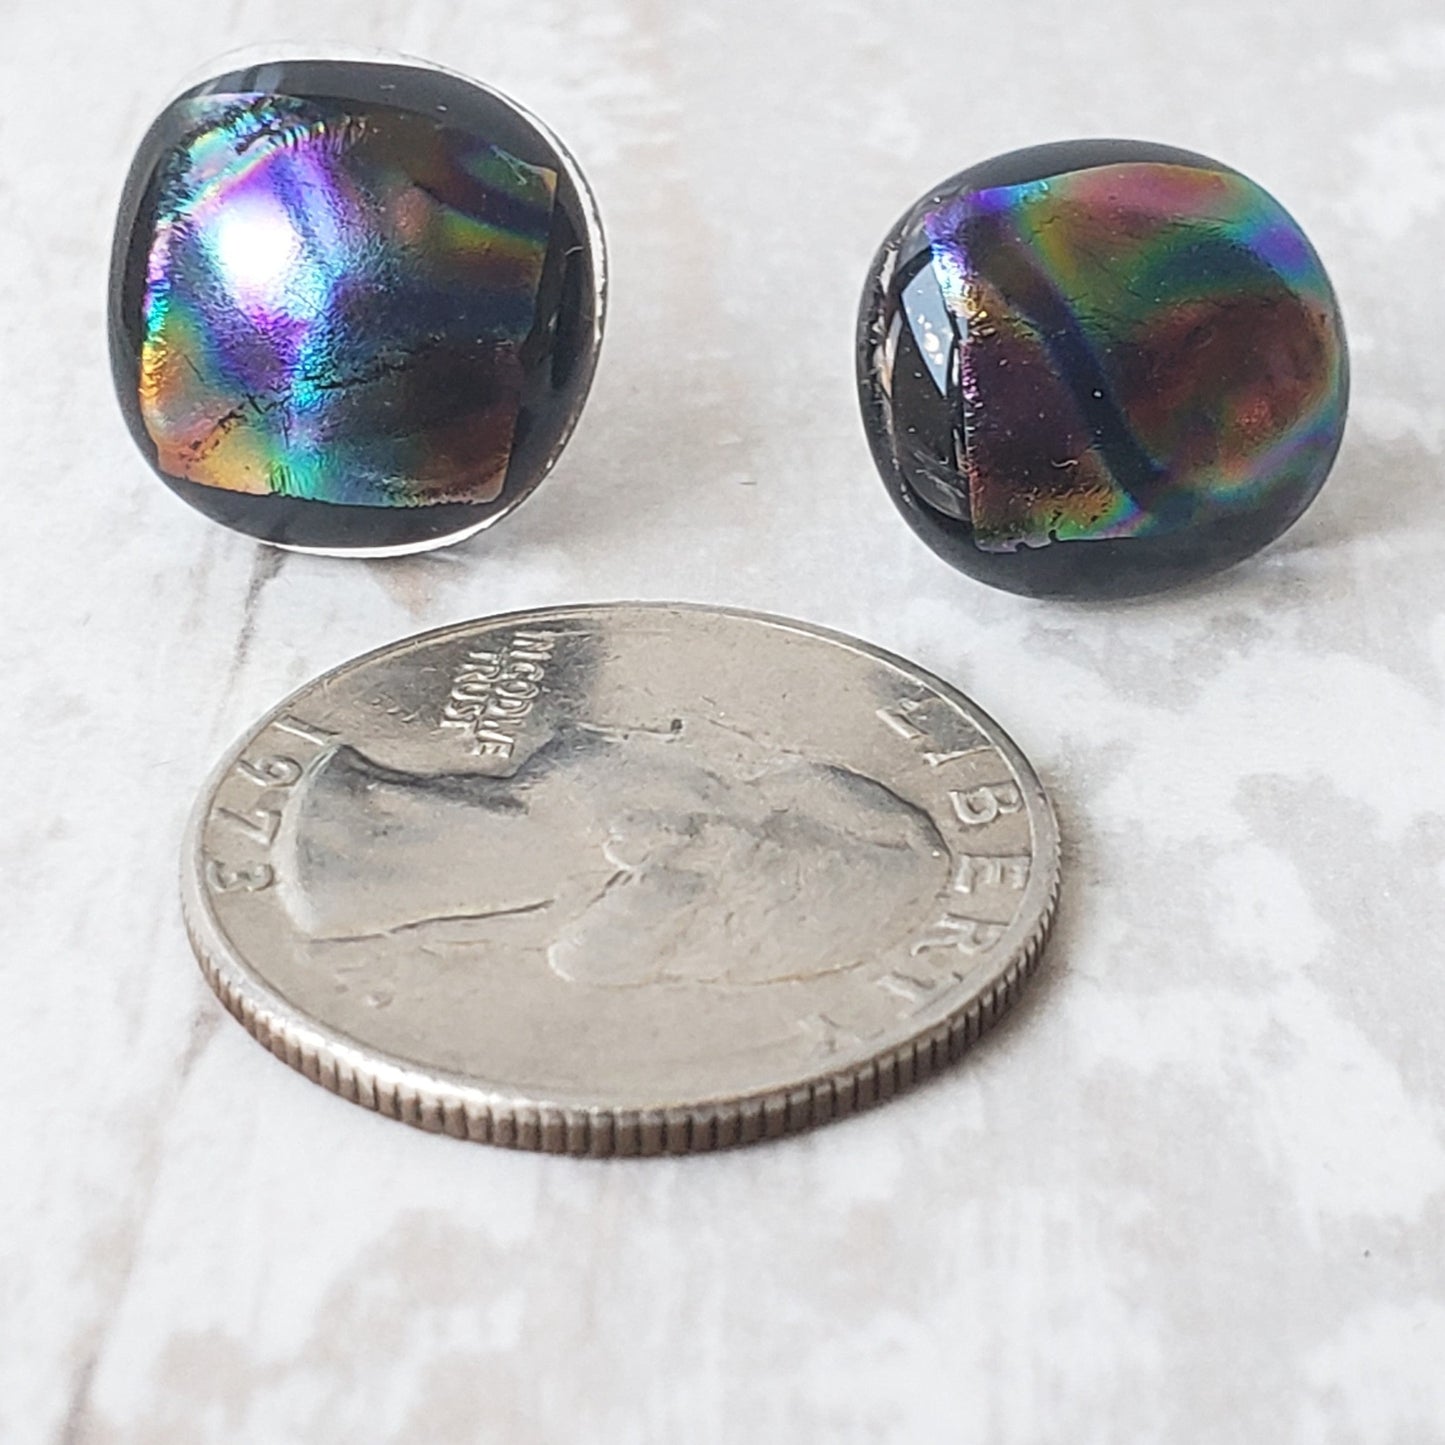 Black stud earrings with a rainbow iridescent top and silver-plated posts.  The earrings are being compared to the size of a quarter.